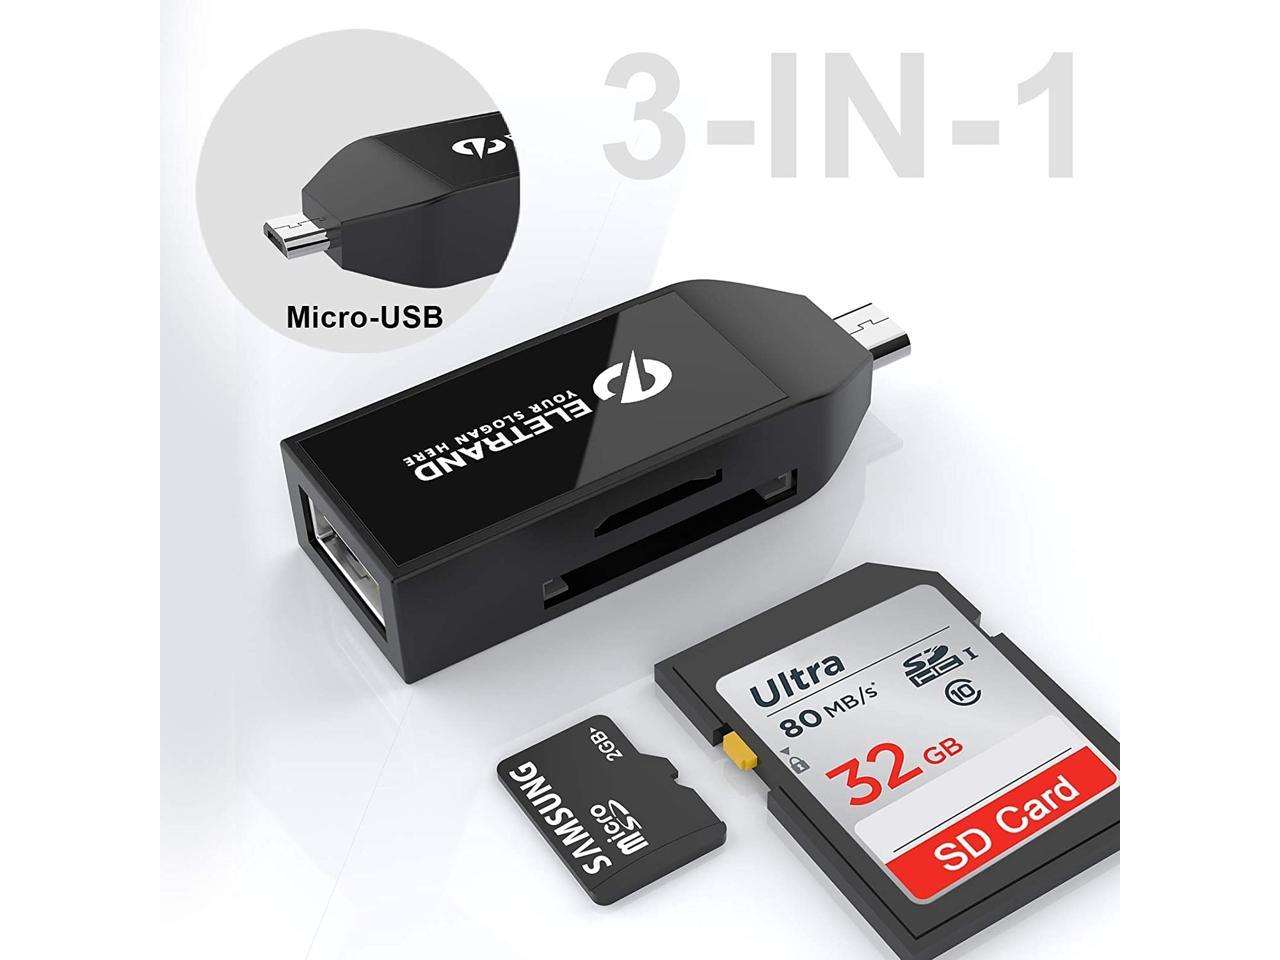 975B Micro USB TO USB 2.0 Adapter Professional OTG Smartphone Charger Converter 